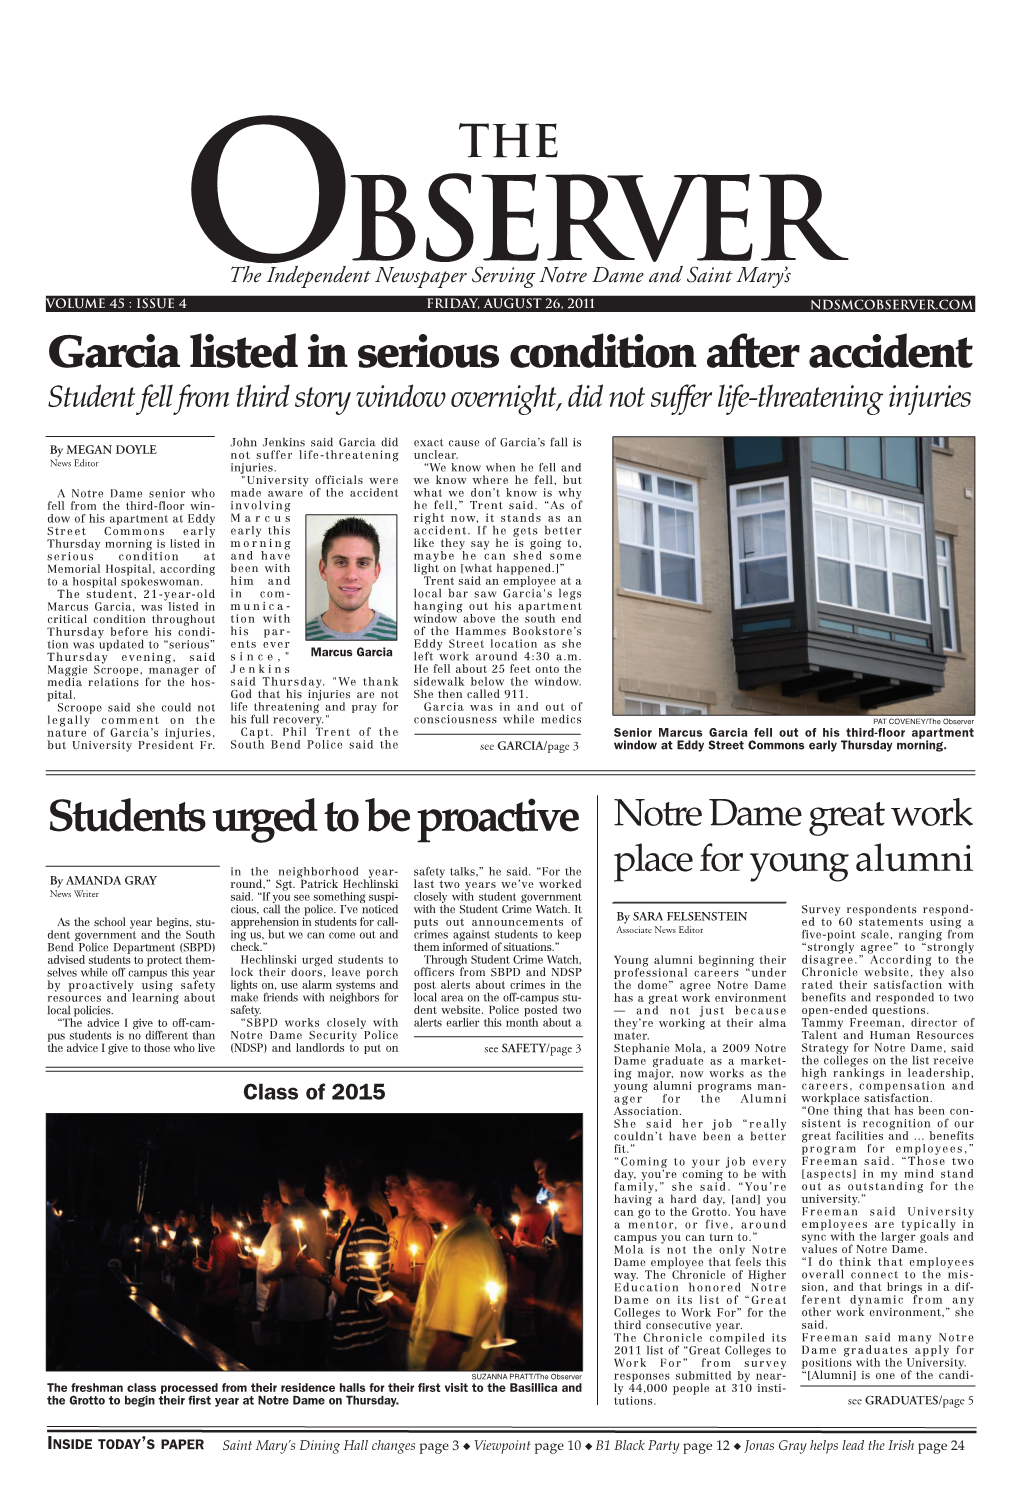 Garcia Listed in Serious Condition After Accident Students Urged to Be